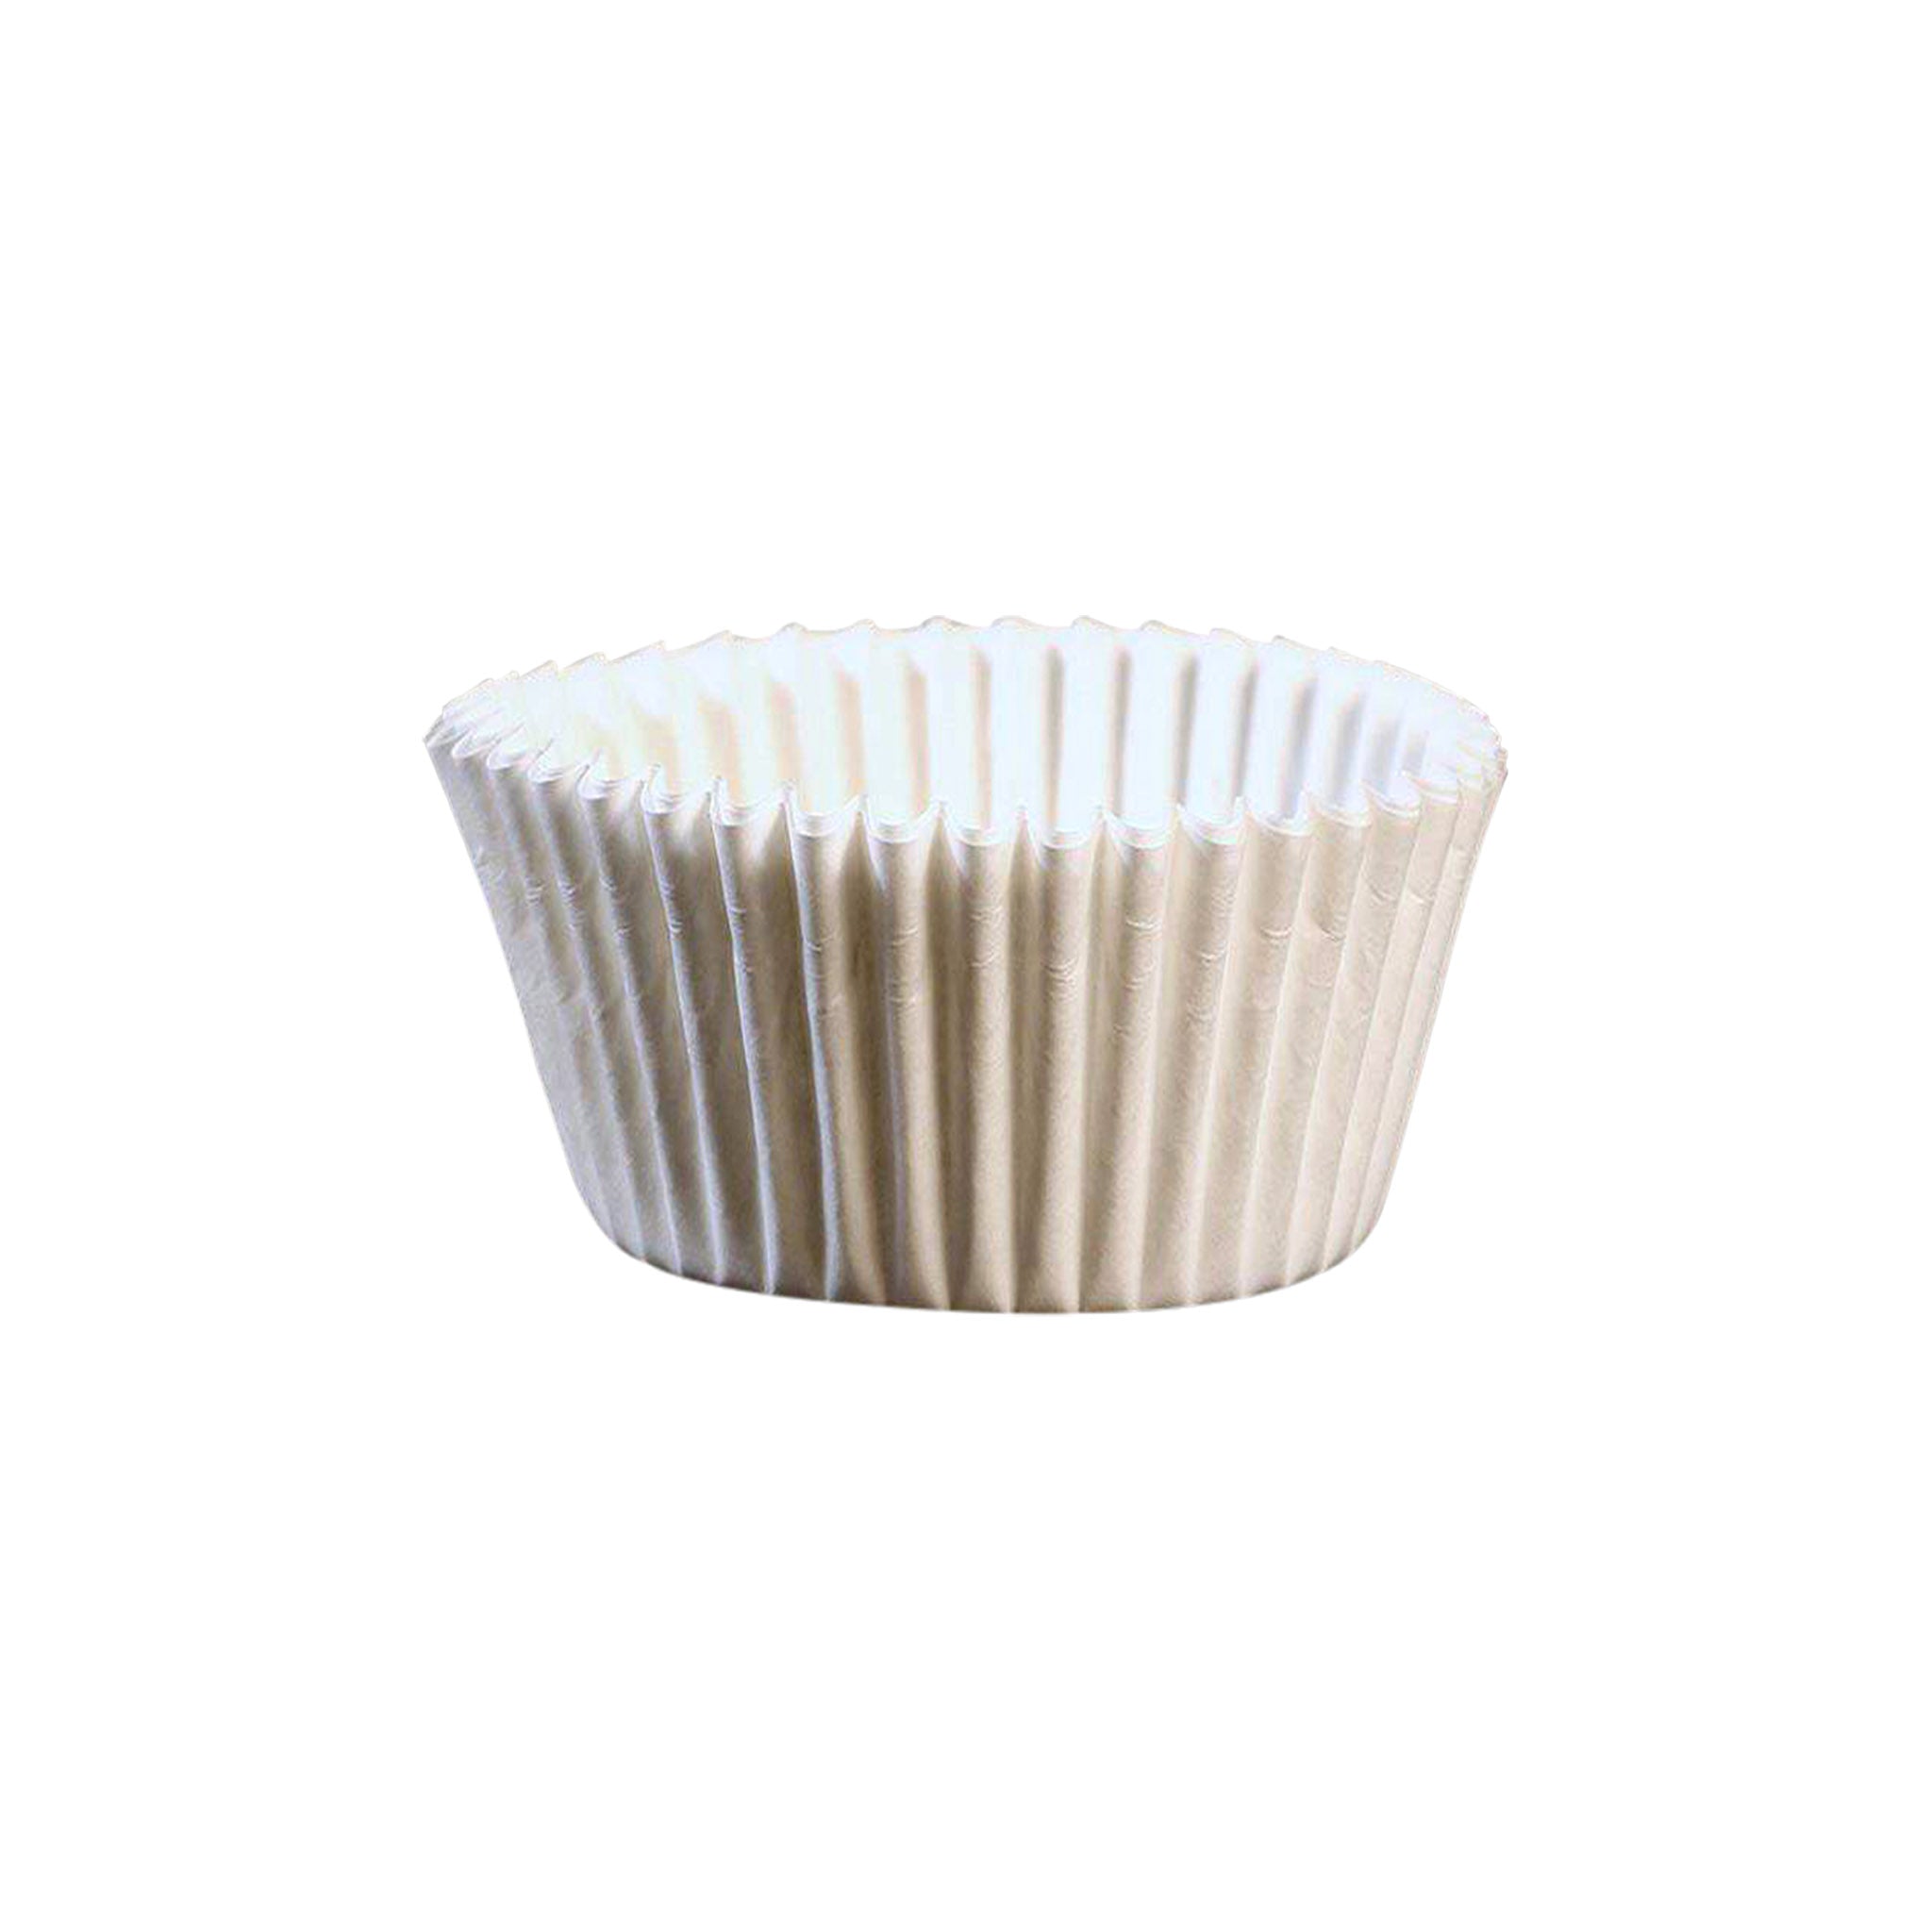 Cup Cake Baking Paper White 1000 Pieces - Hotpack Global